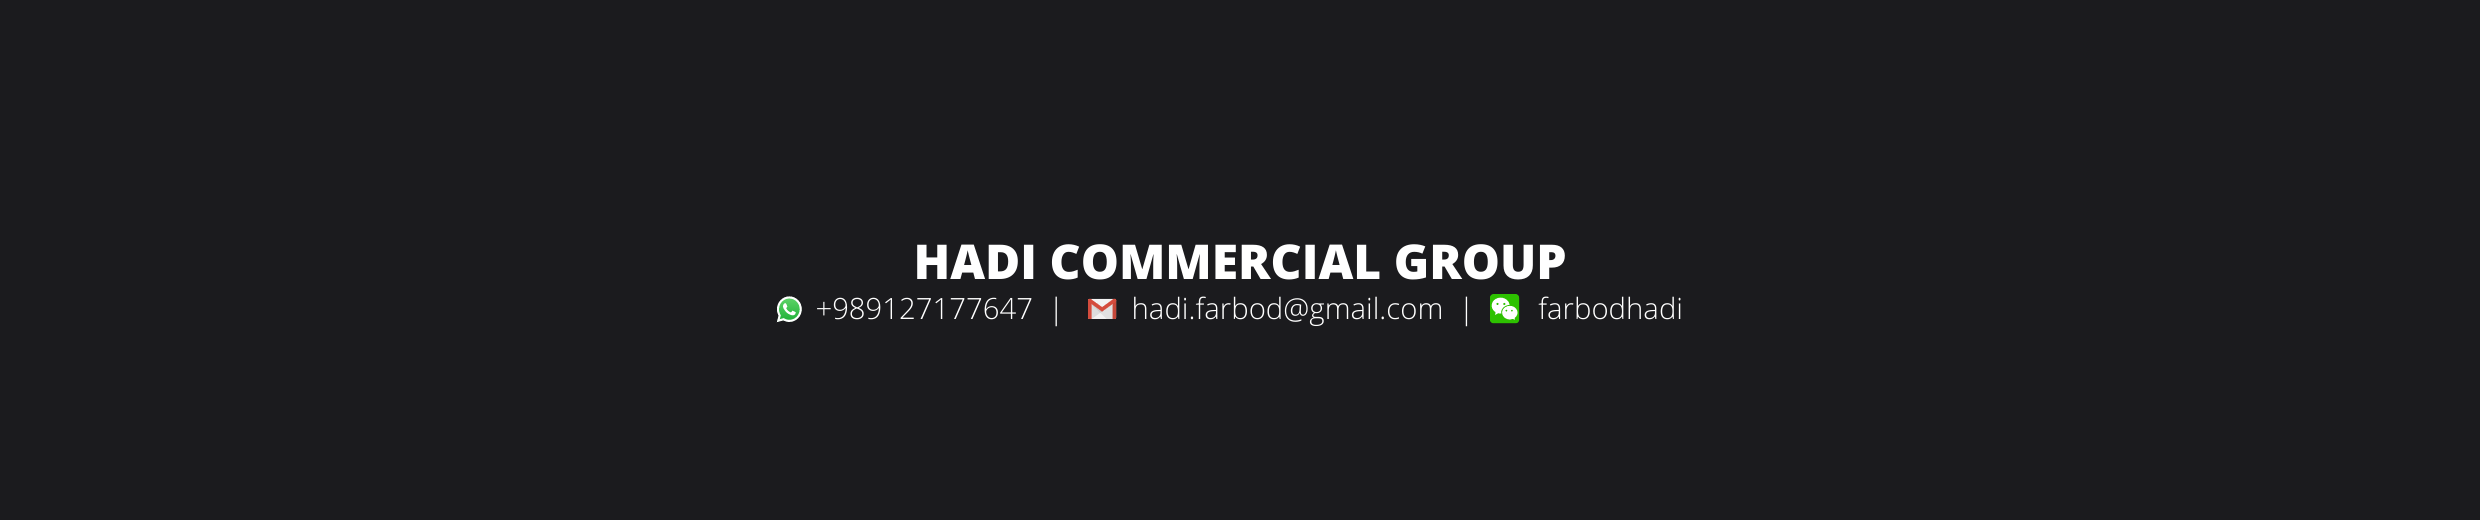 Hadi Commercial Group